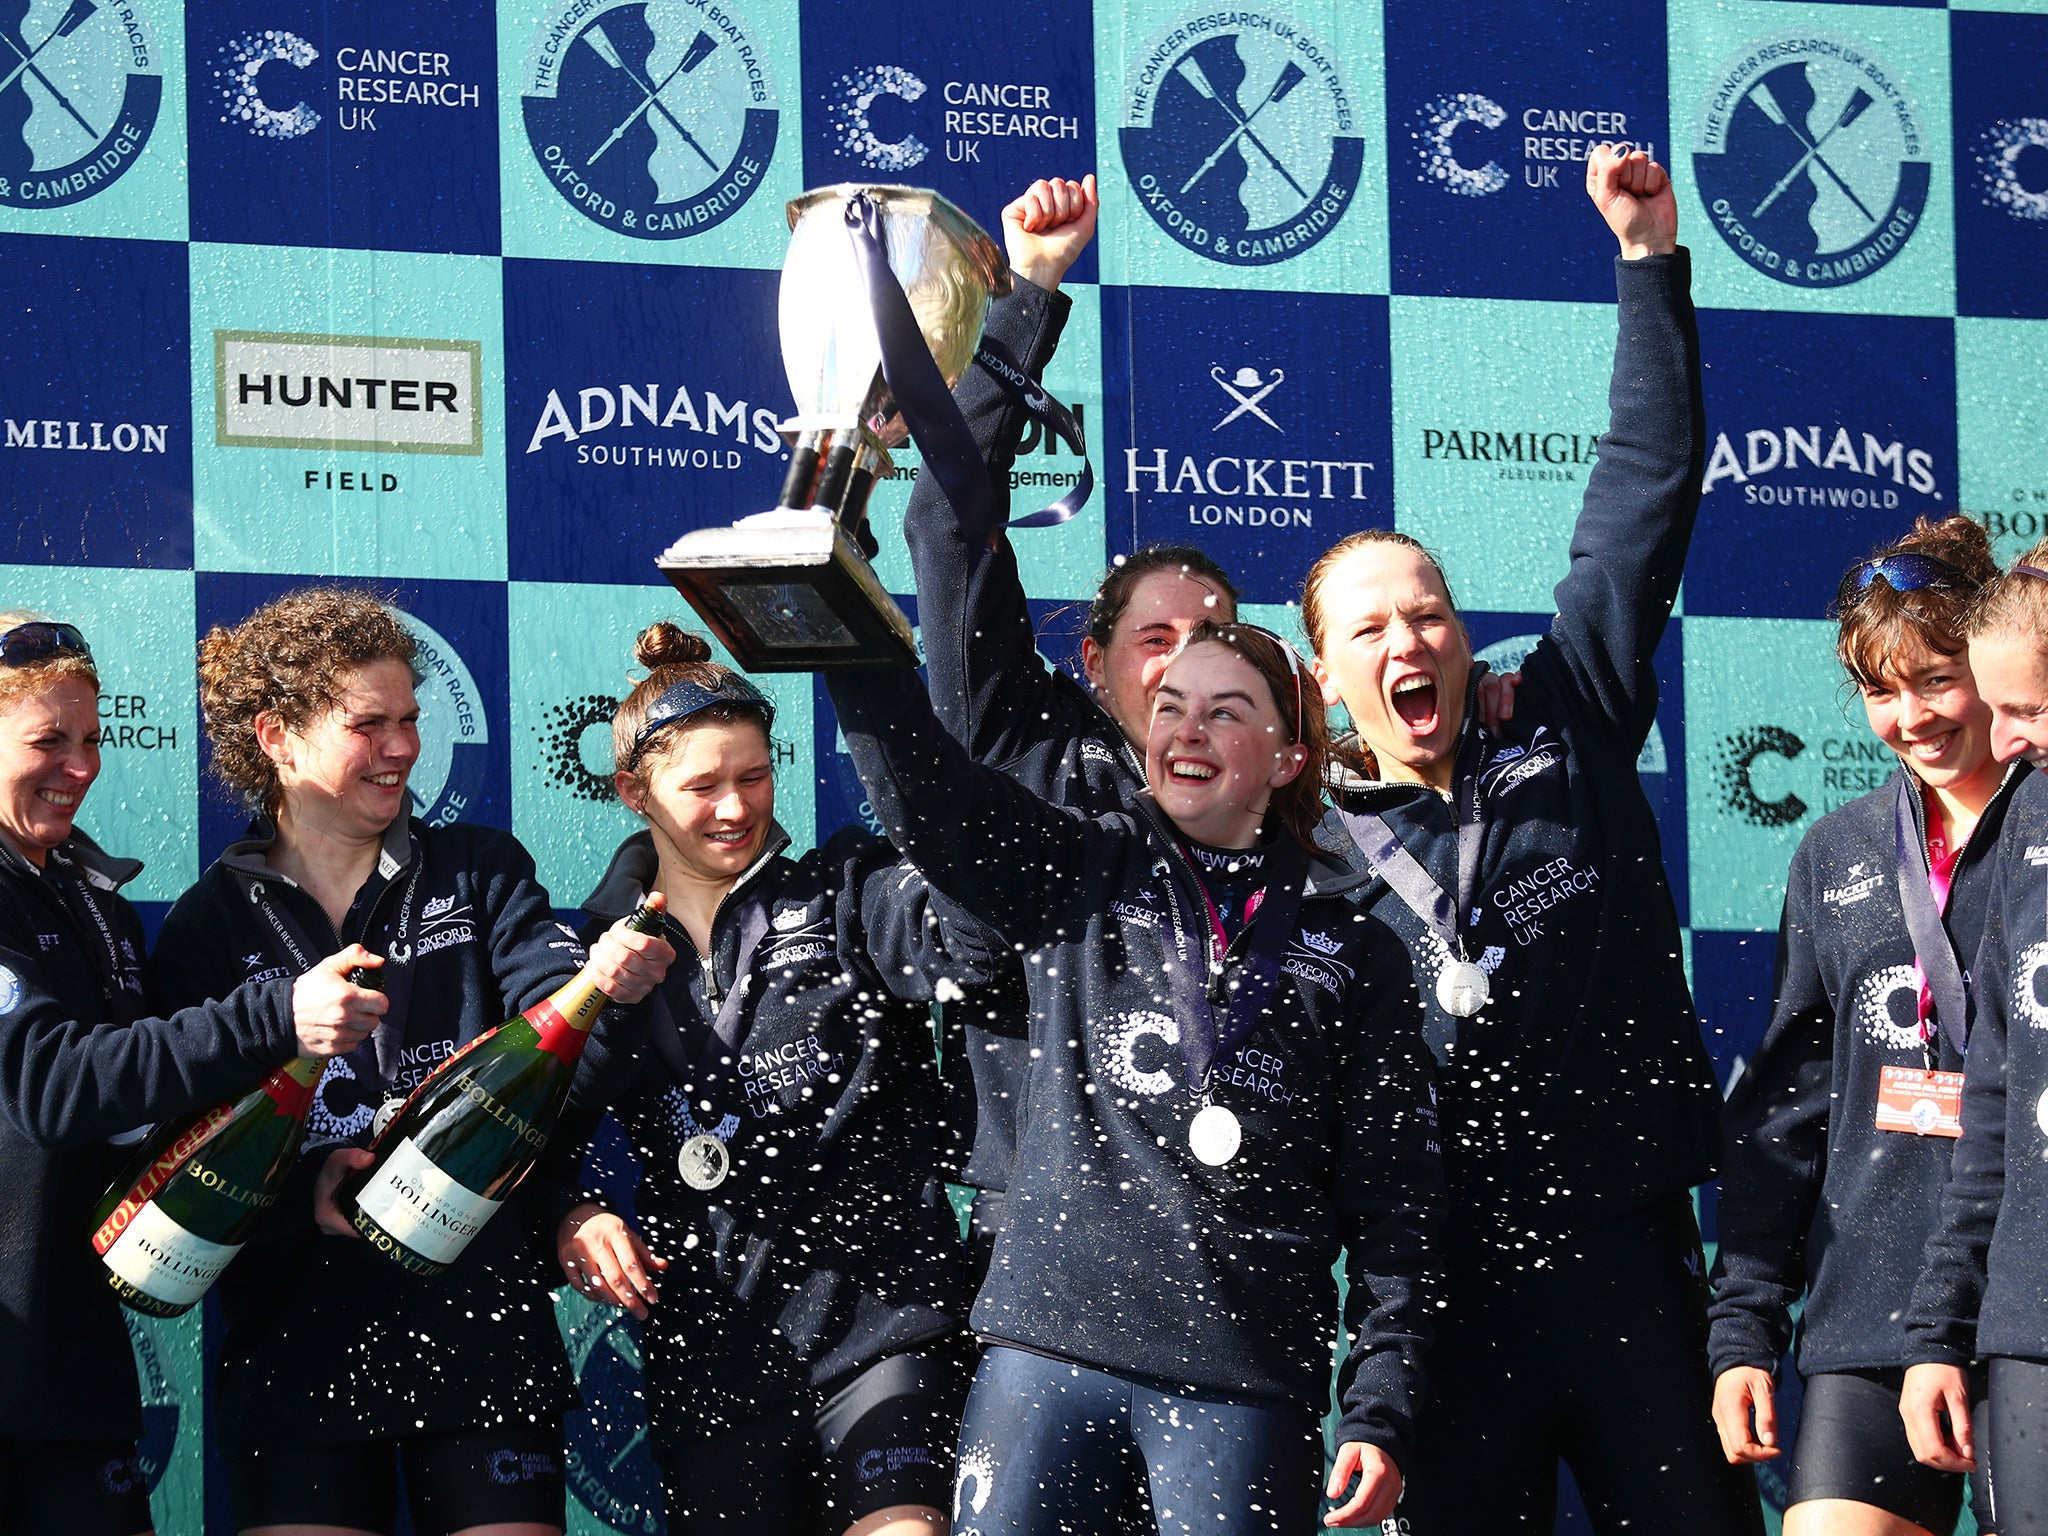 The Oxford crew celebrate with the trophy following their victory during The Cancer Research UK Women's Boat Race